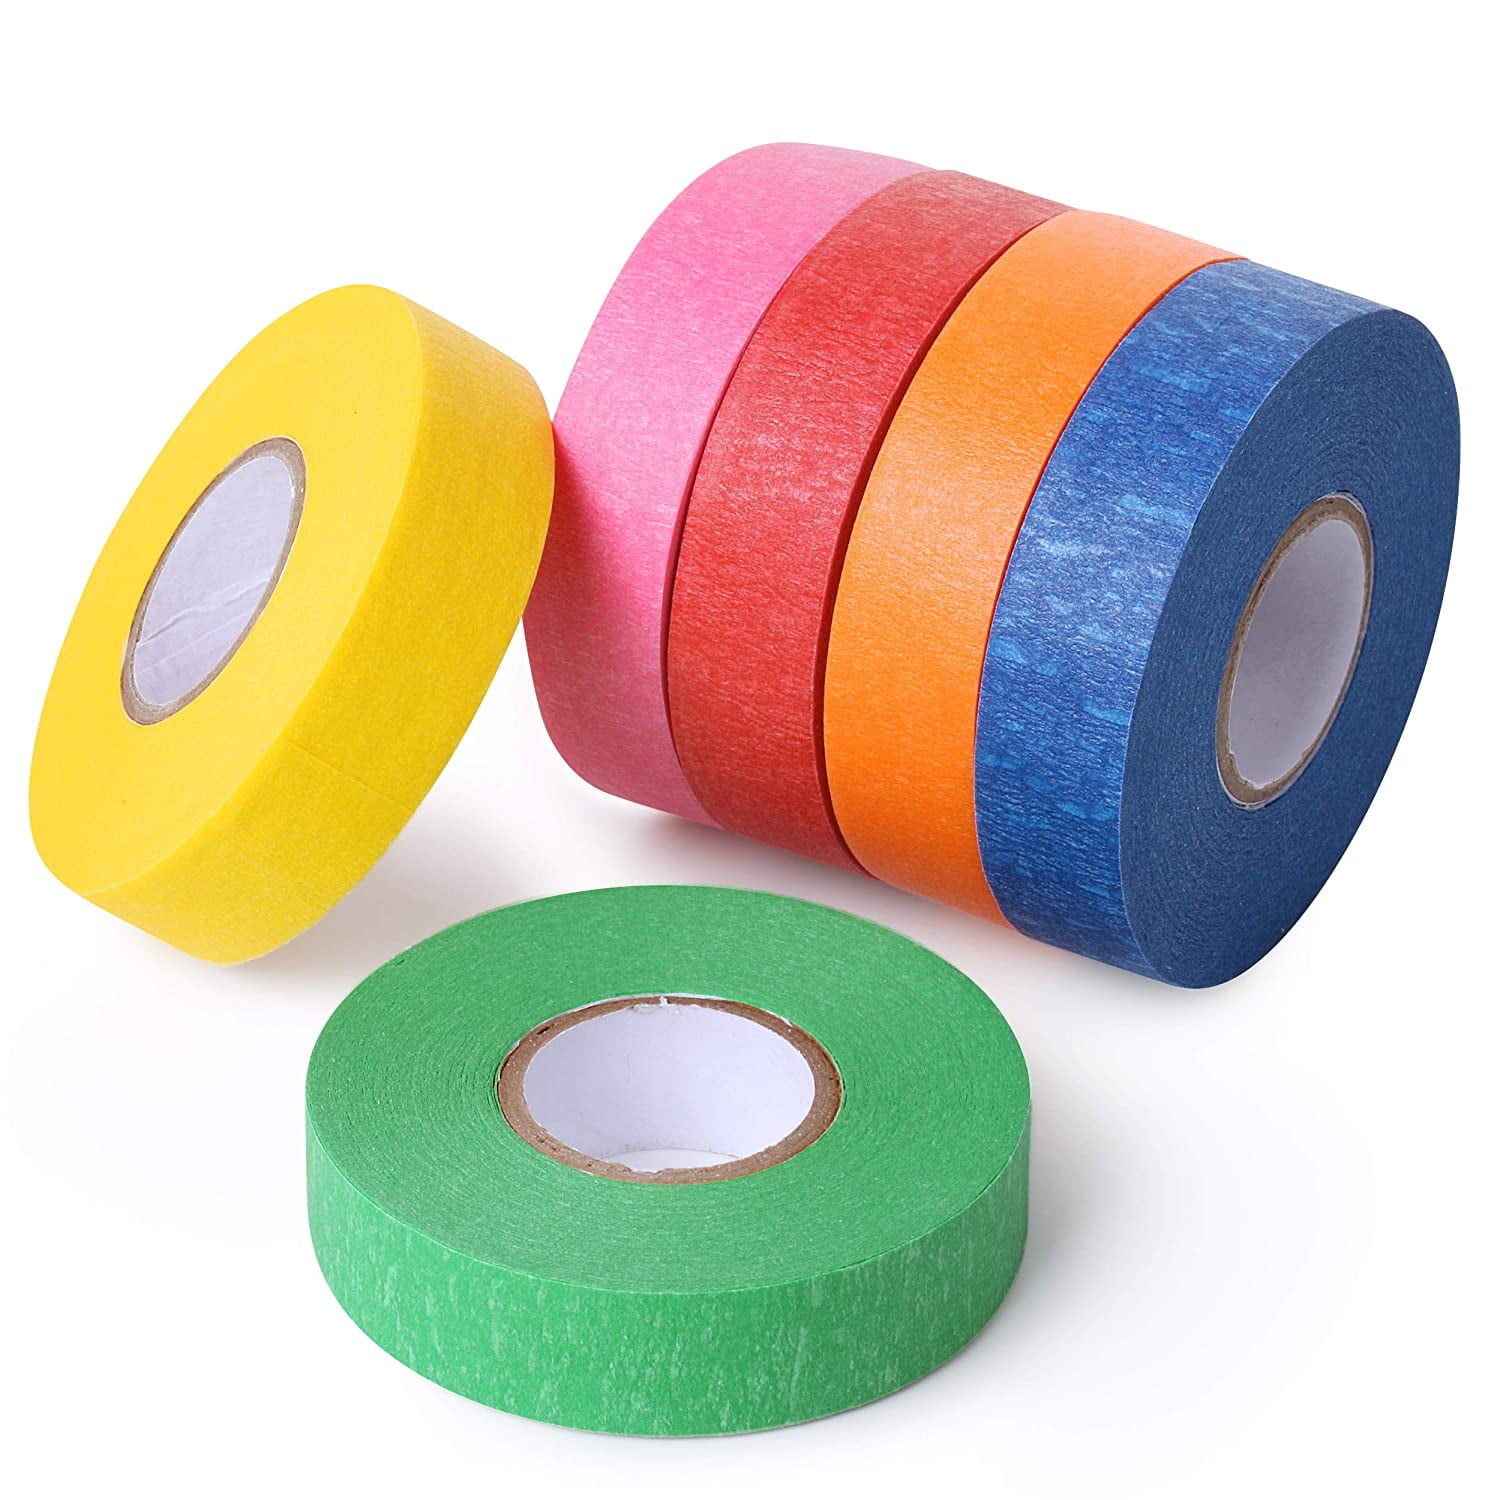 Heldig Colored Masking Tape, Colored Painters Tape for Arts and Crafts, 6  Pack, Drafting Tape, Craft Tape, Labeling Tape, Paper TapeB 